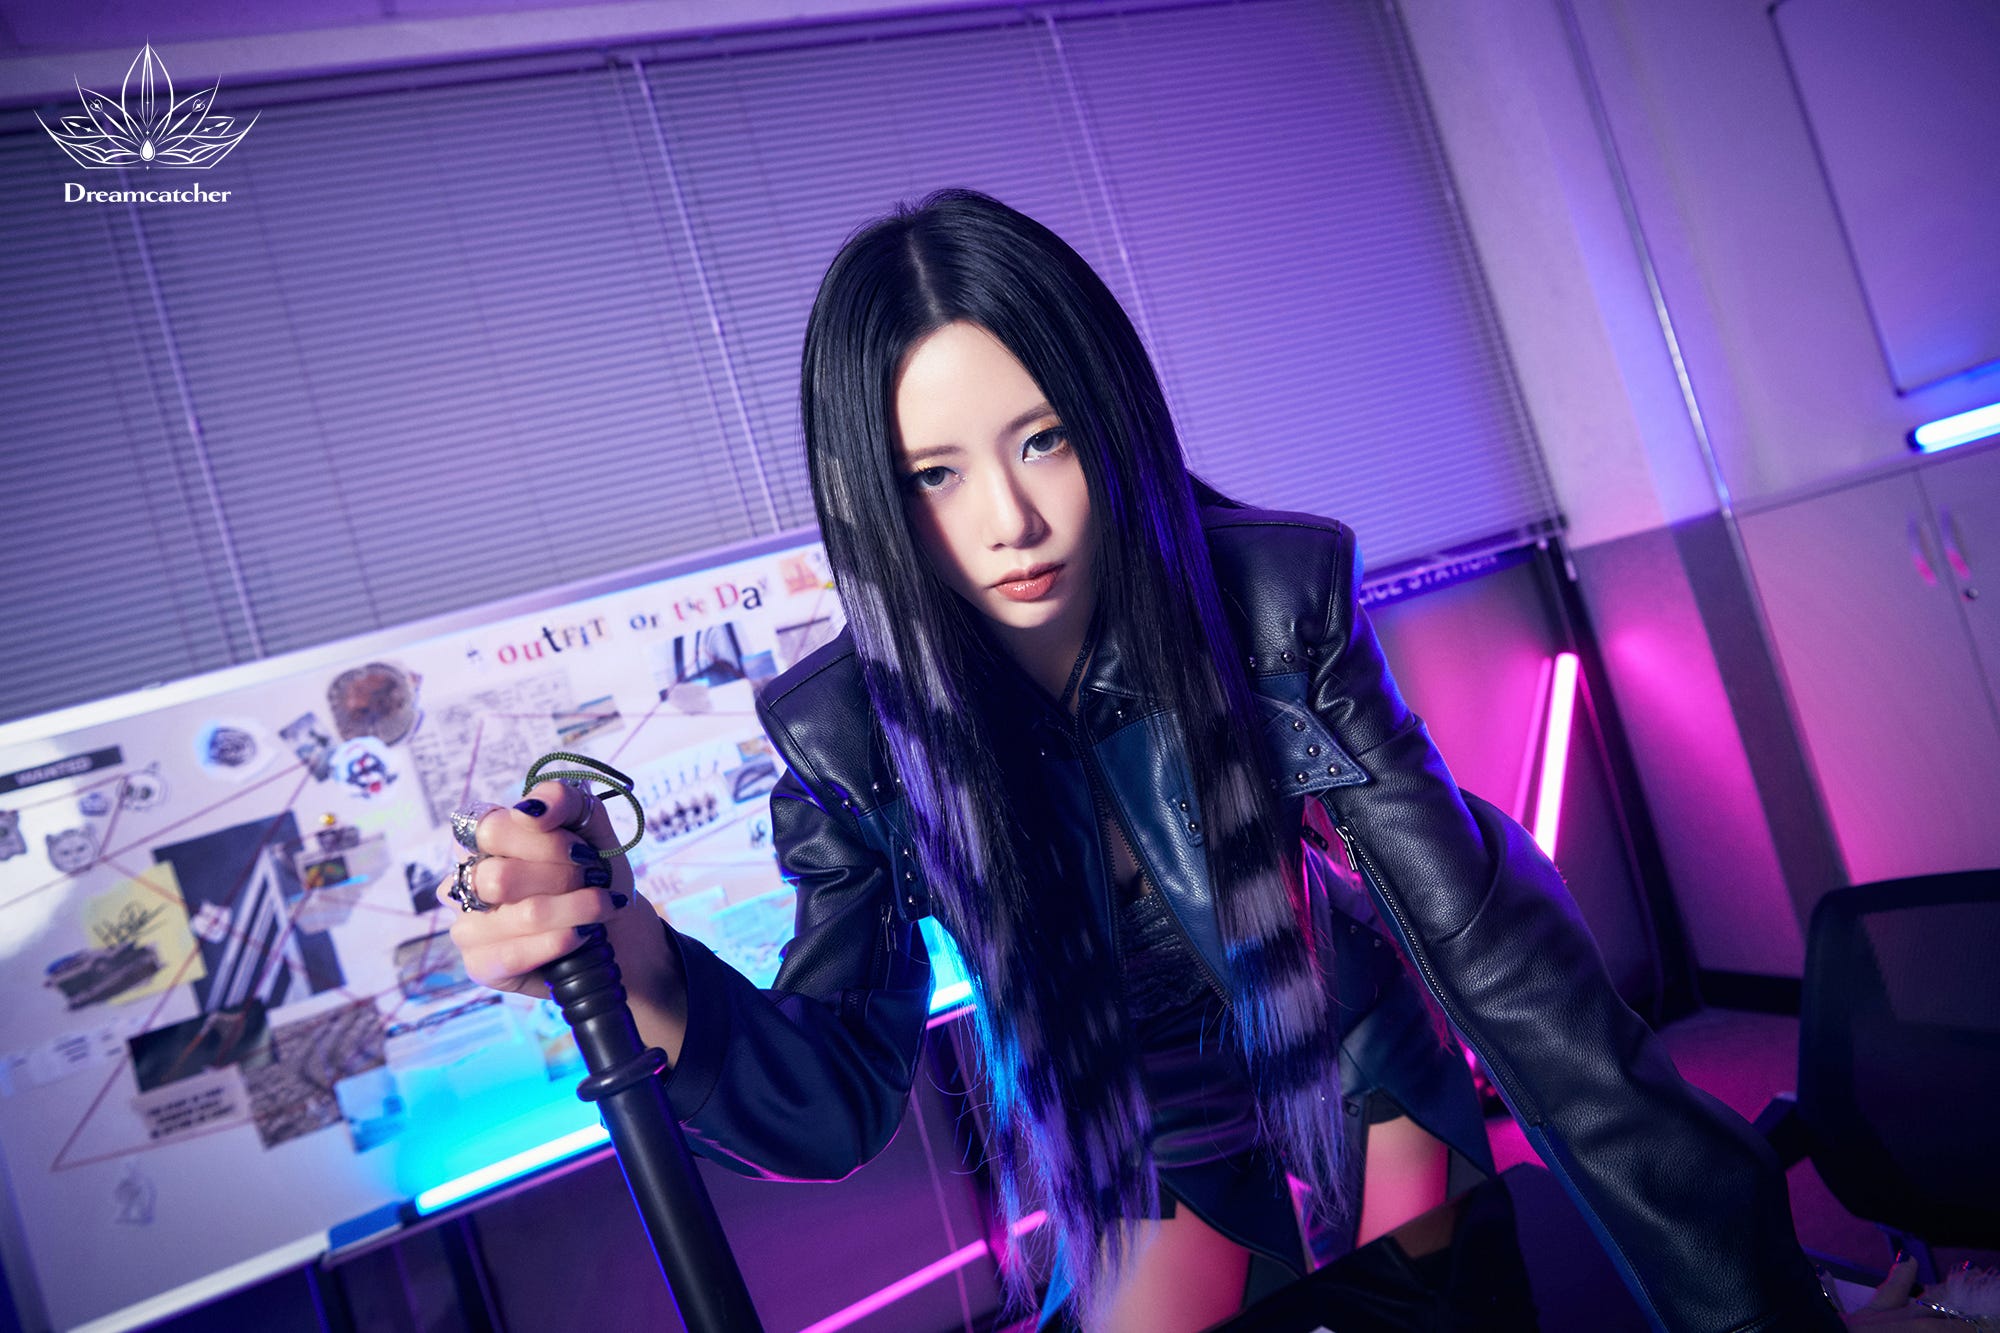 Dreamcatcher's JiU poses staring intently into the camera, with a police baton in her hand, a board connecting together elements from a case in an office setting.